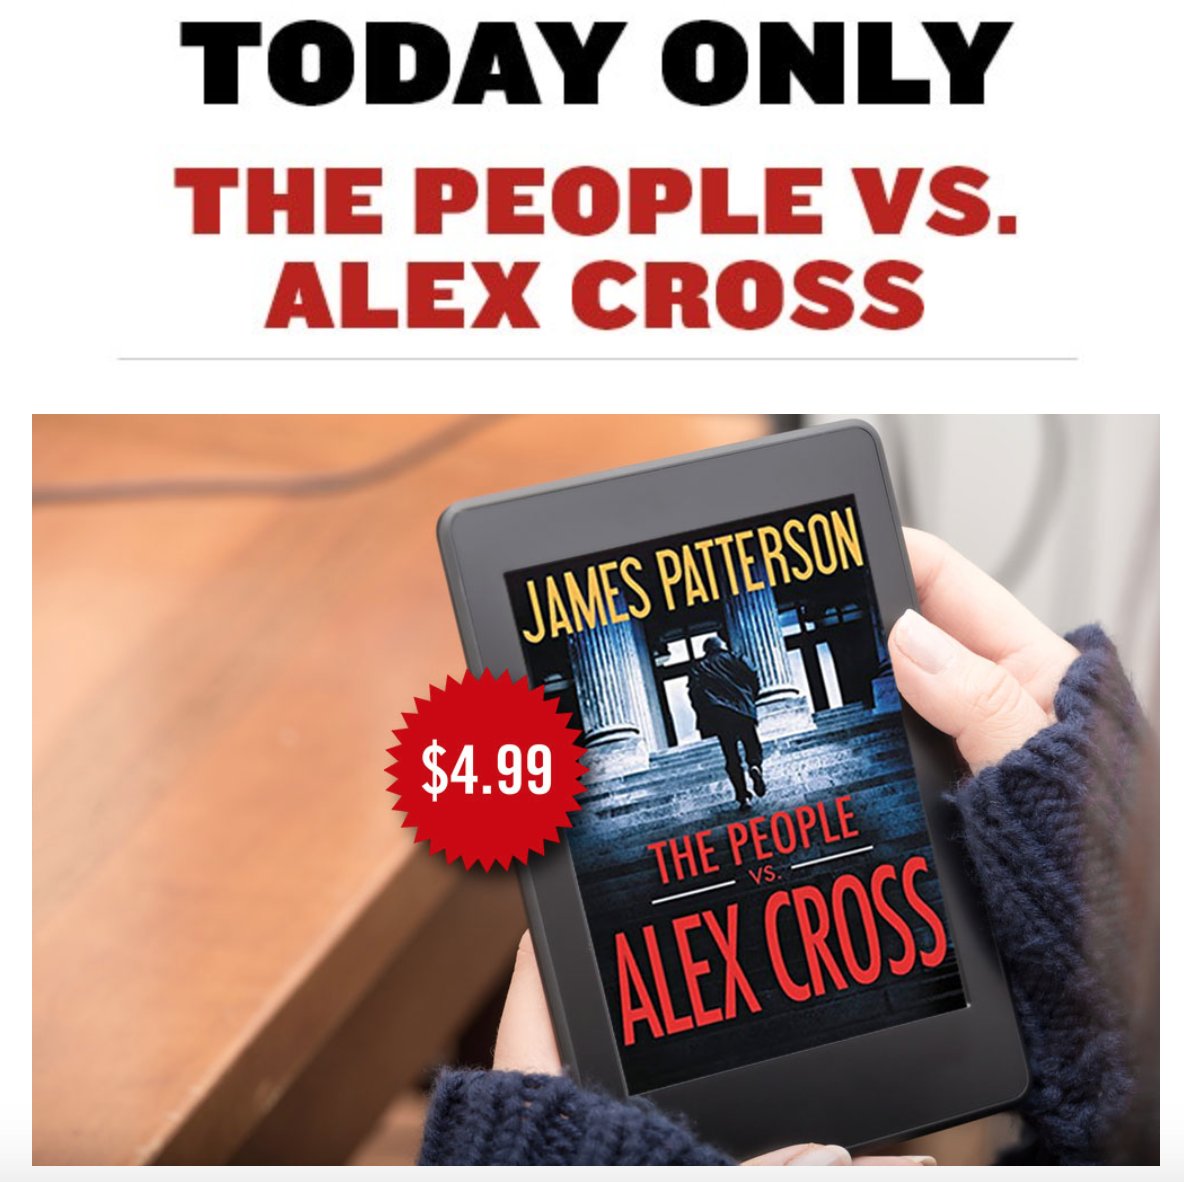 Today only: THE PEOPLE VS ALEX CROSS is just $4.99 on @AmazonKindle: amzn.to/2CQupsA https://t.co/i1XrYcmVhL